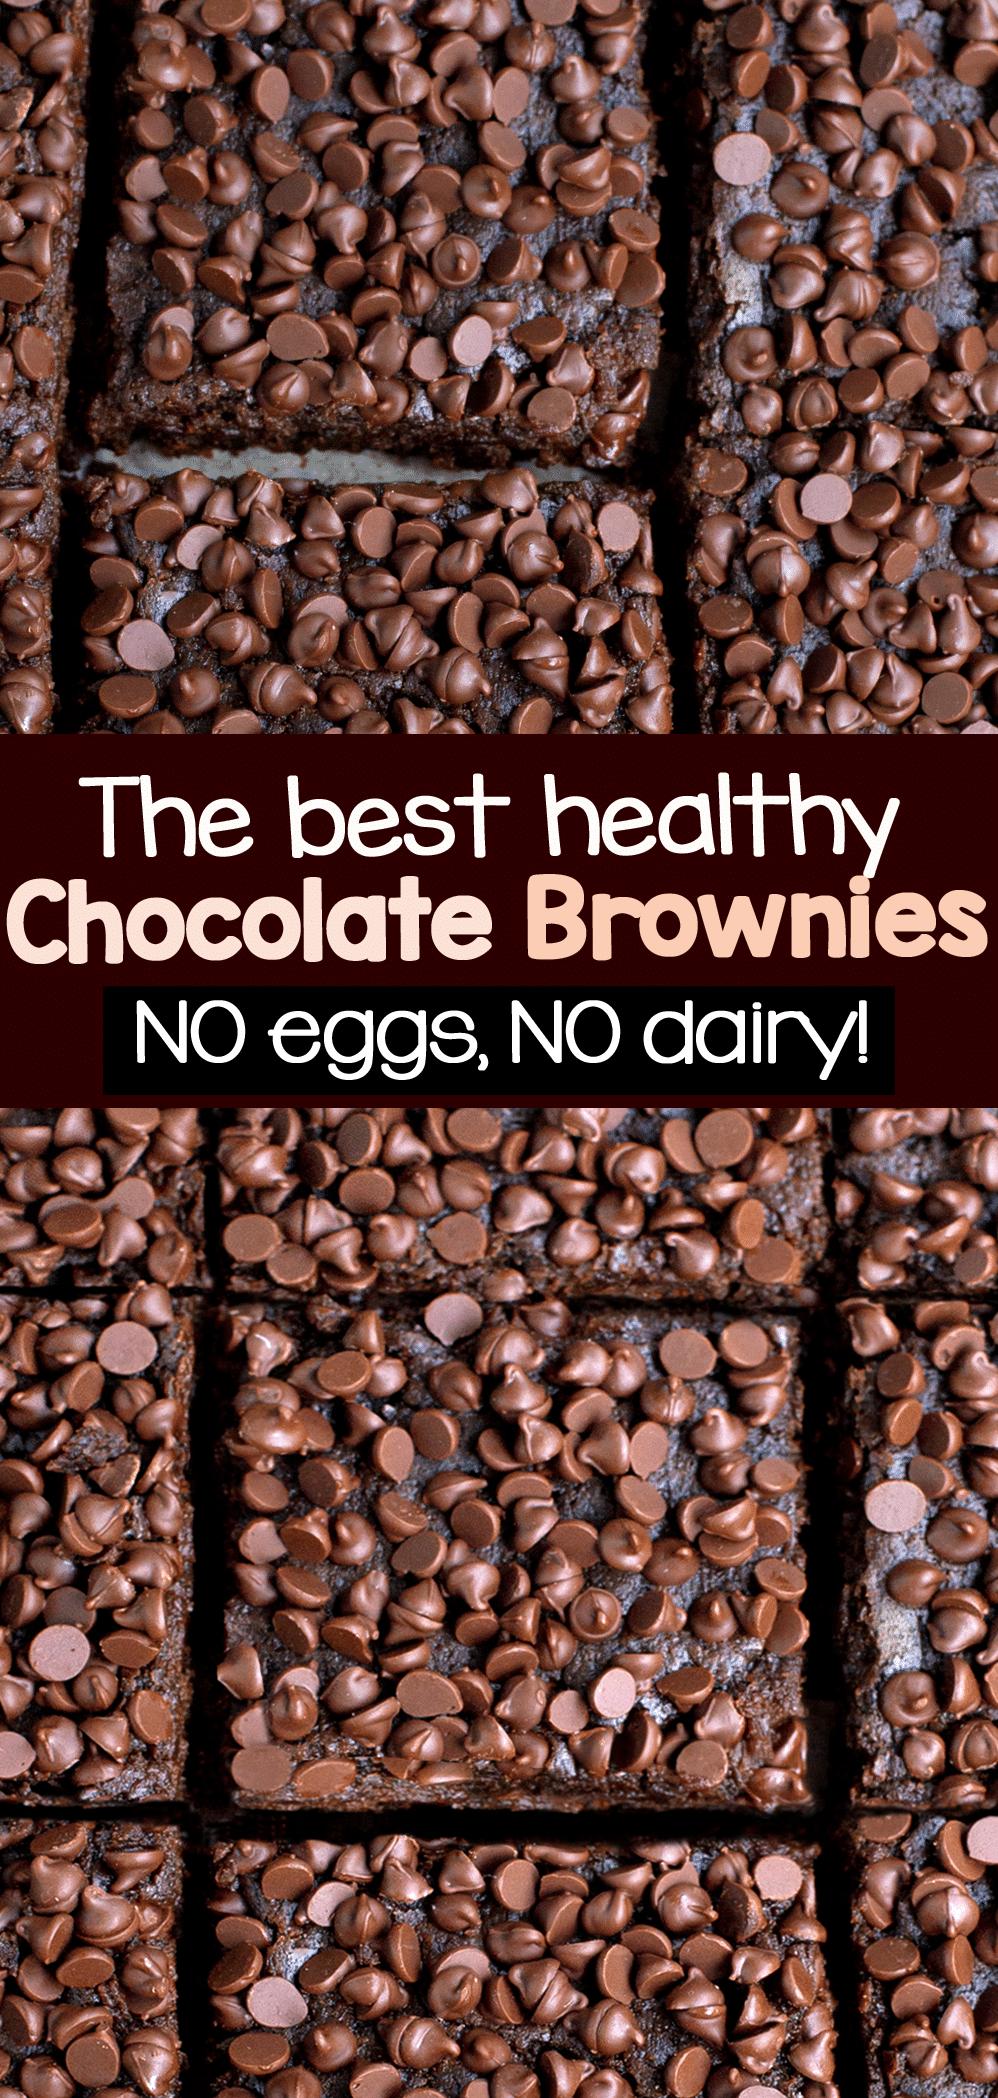  Say goodbye to boring brownies and hello to a delicious and healthy treat.